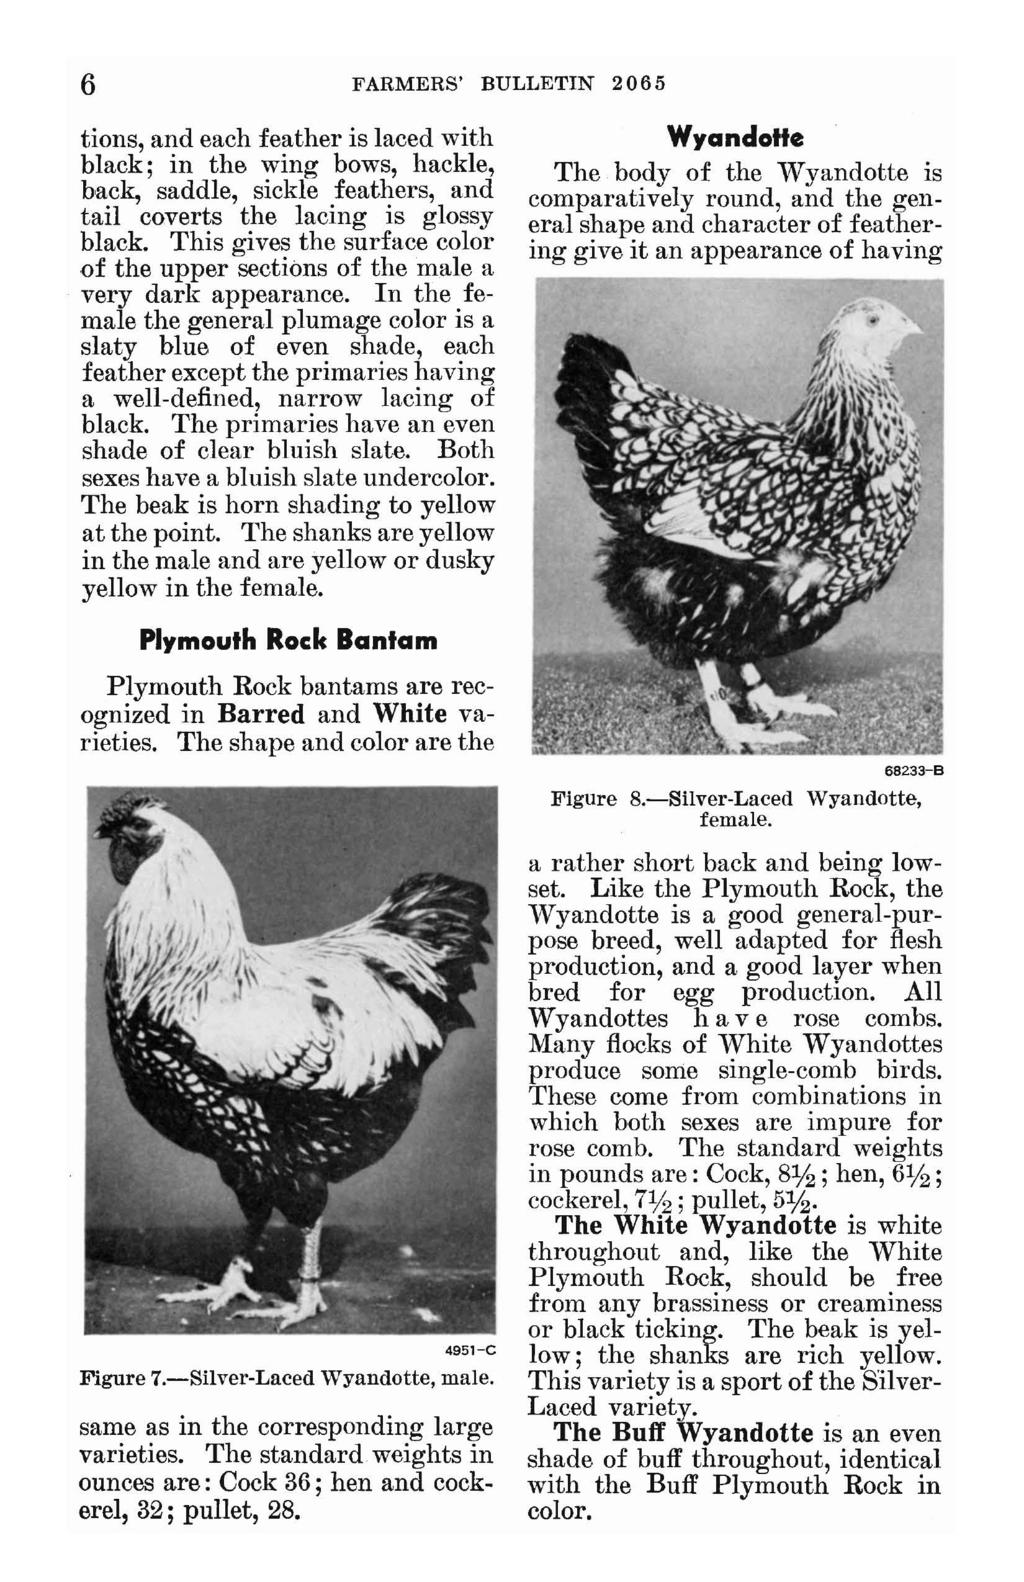 6 FARMERS' BULLETIN 2065 tions, and each feather is laced with black; in the wing bows, hackle, back, saddle, sickle feathers, and tail coverts the lacing is glossy black.